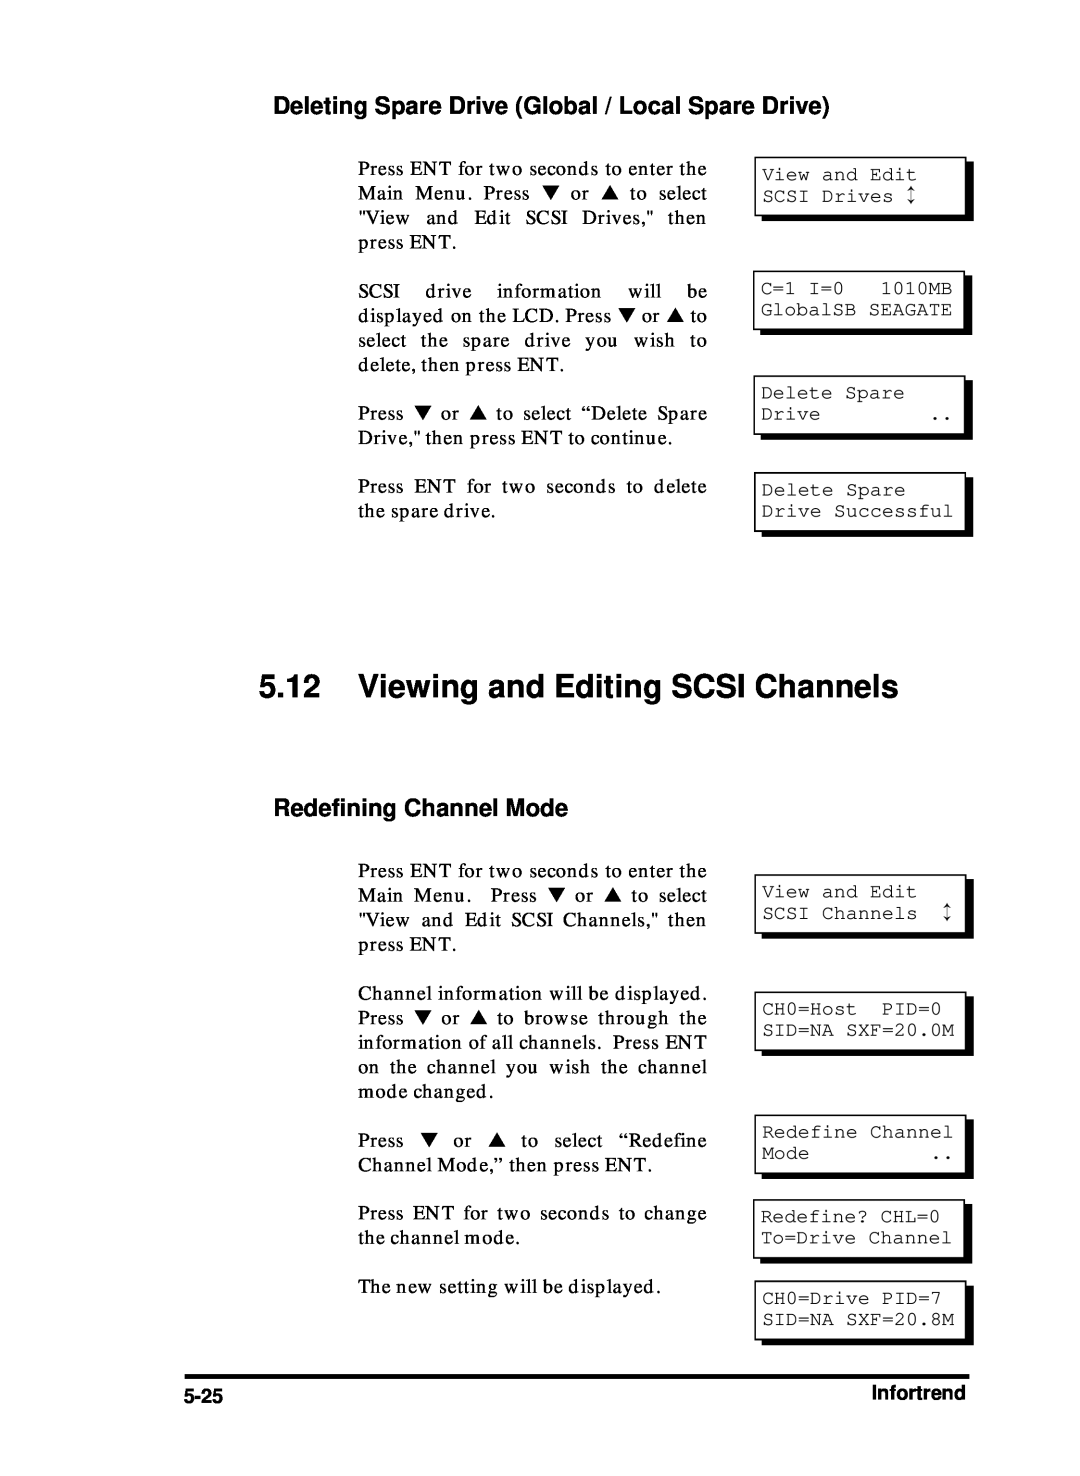 Compaq Infortrend manual Viewing and Editing SCSI Channels, Deleting Spare Drive Global / Local Spare Drive 